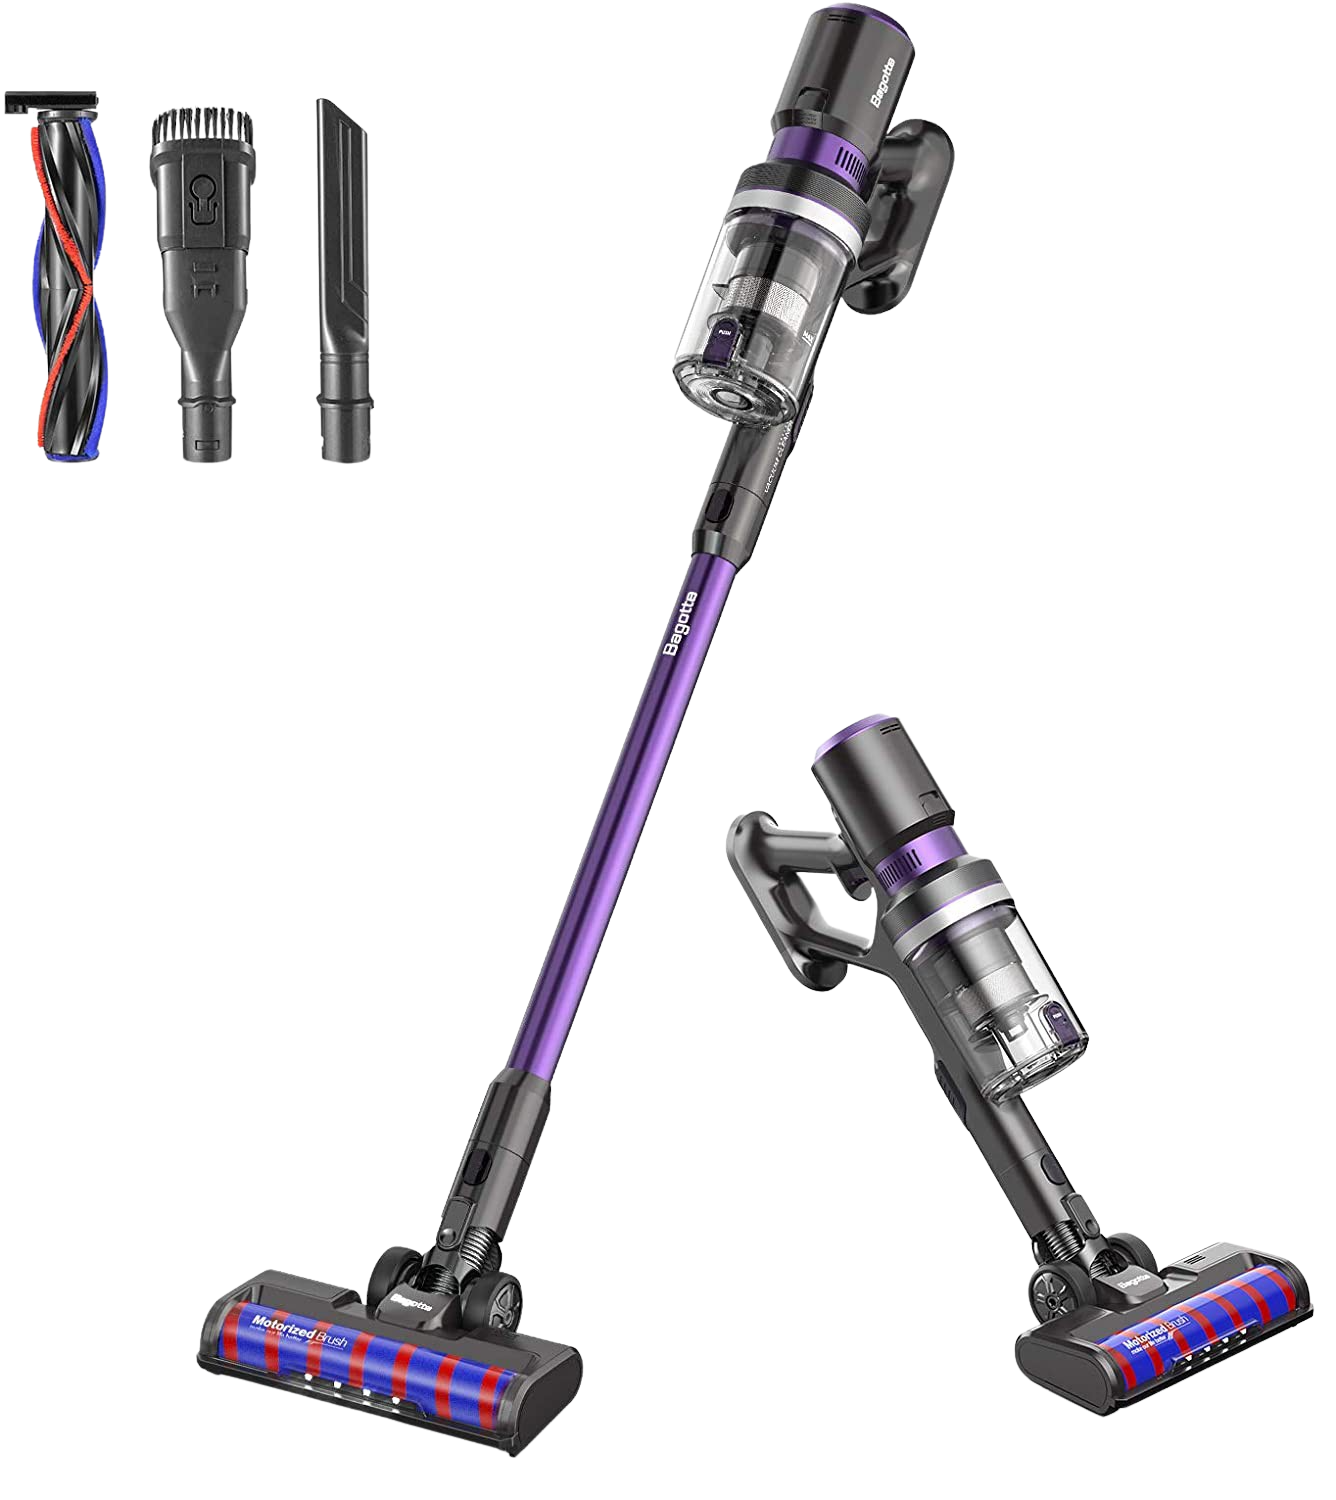 Bagotte BS900 25000PA 8 in 1 Stick Handheld Cordless Vacuum Cleaner New